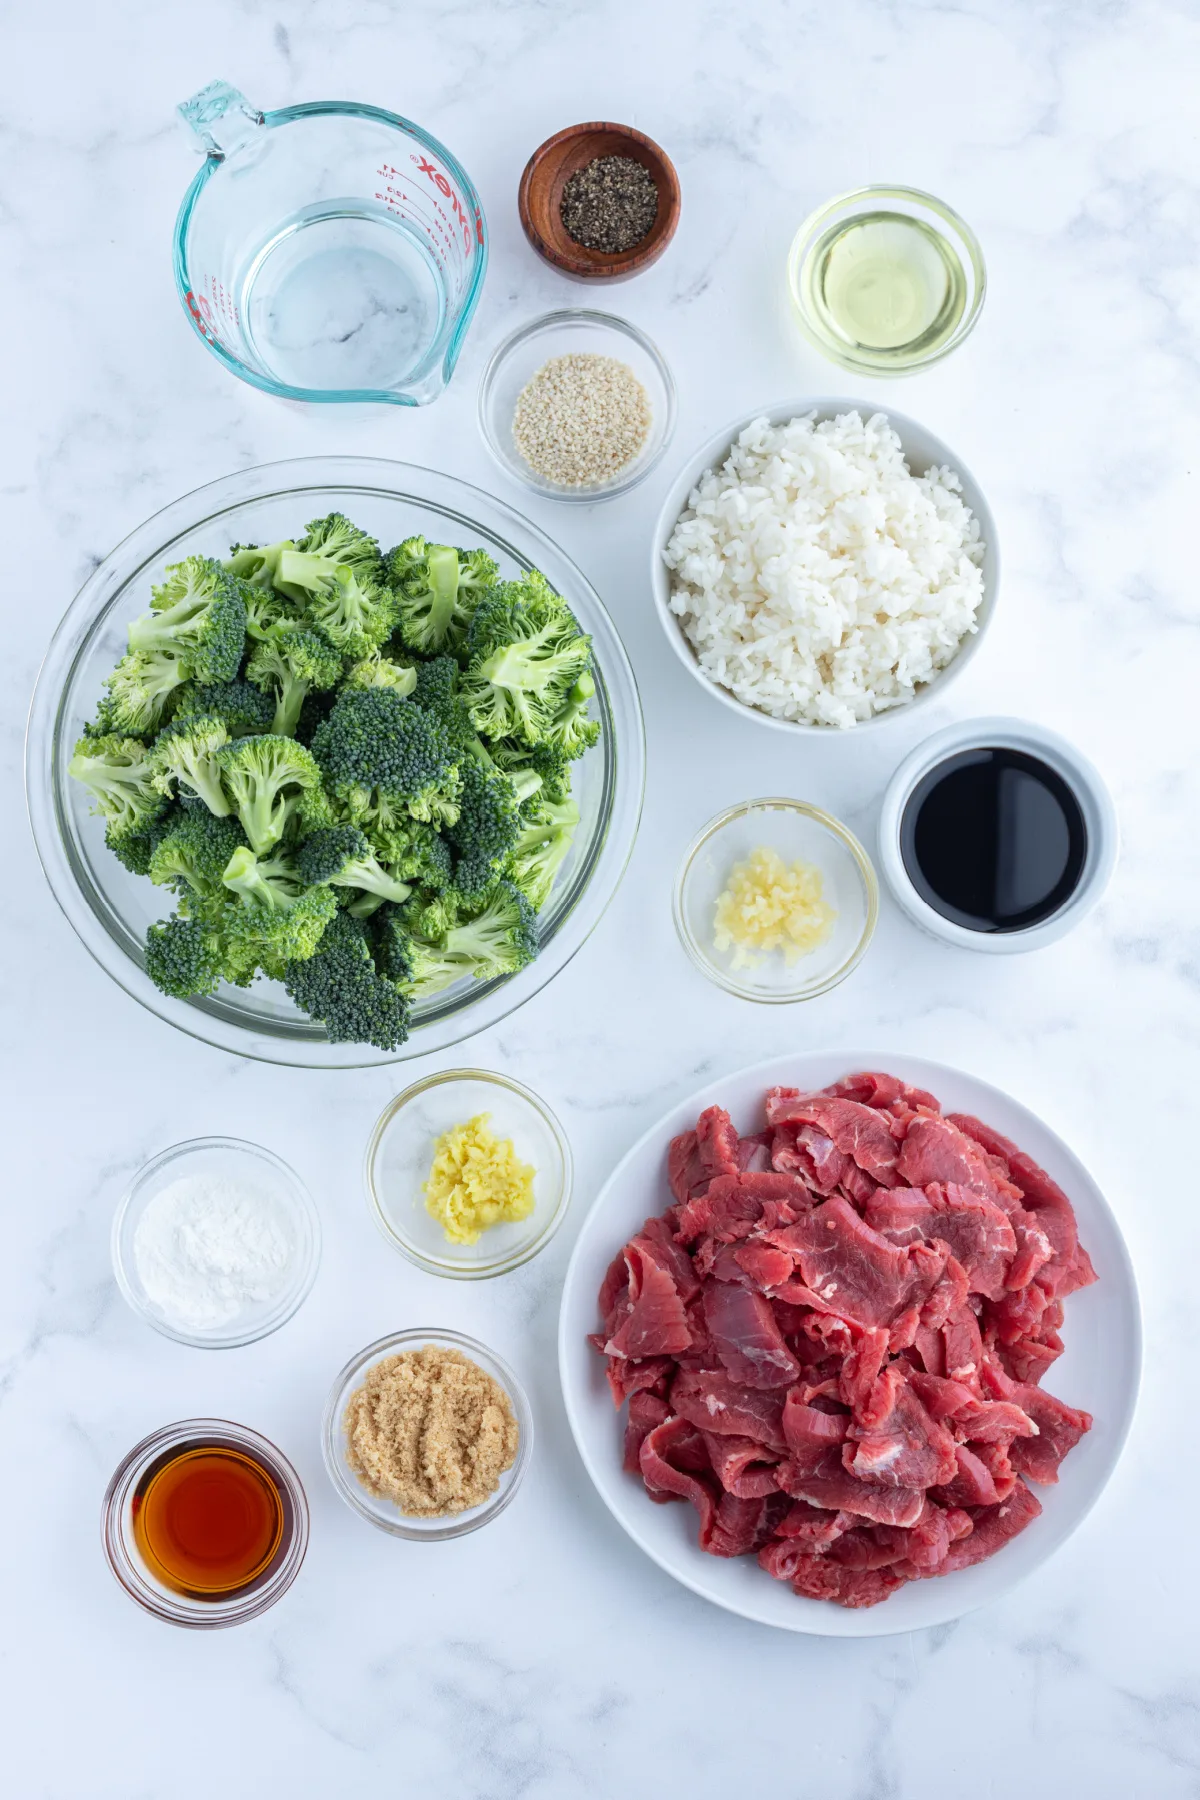 ingredients displayed for making beef and broccoli stir fry